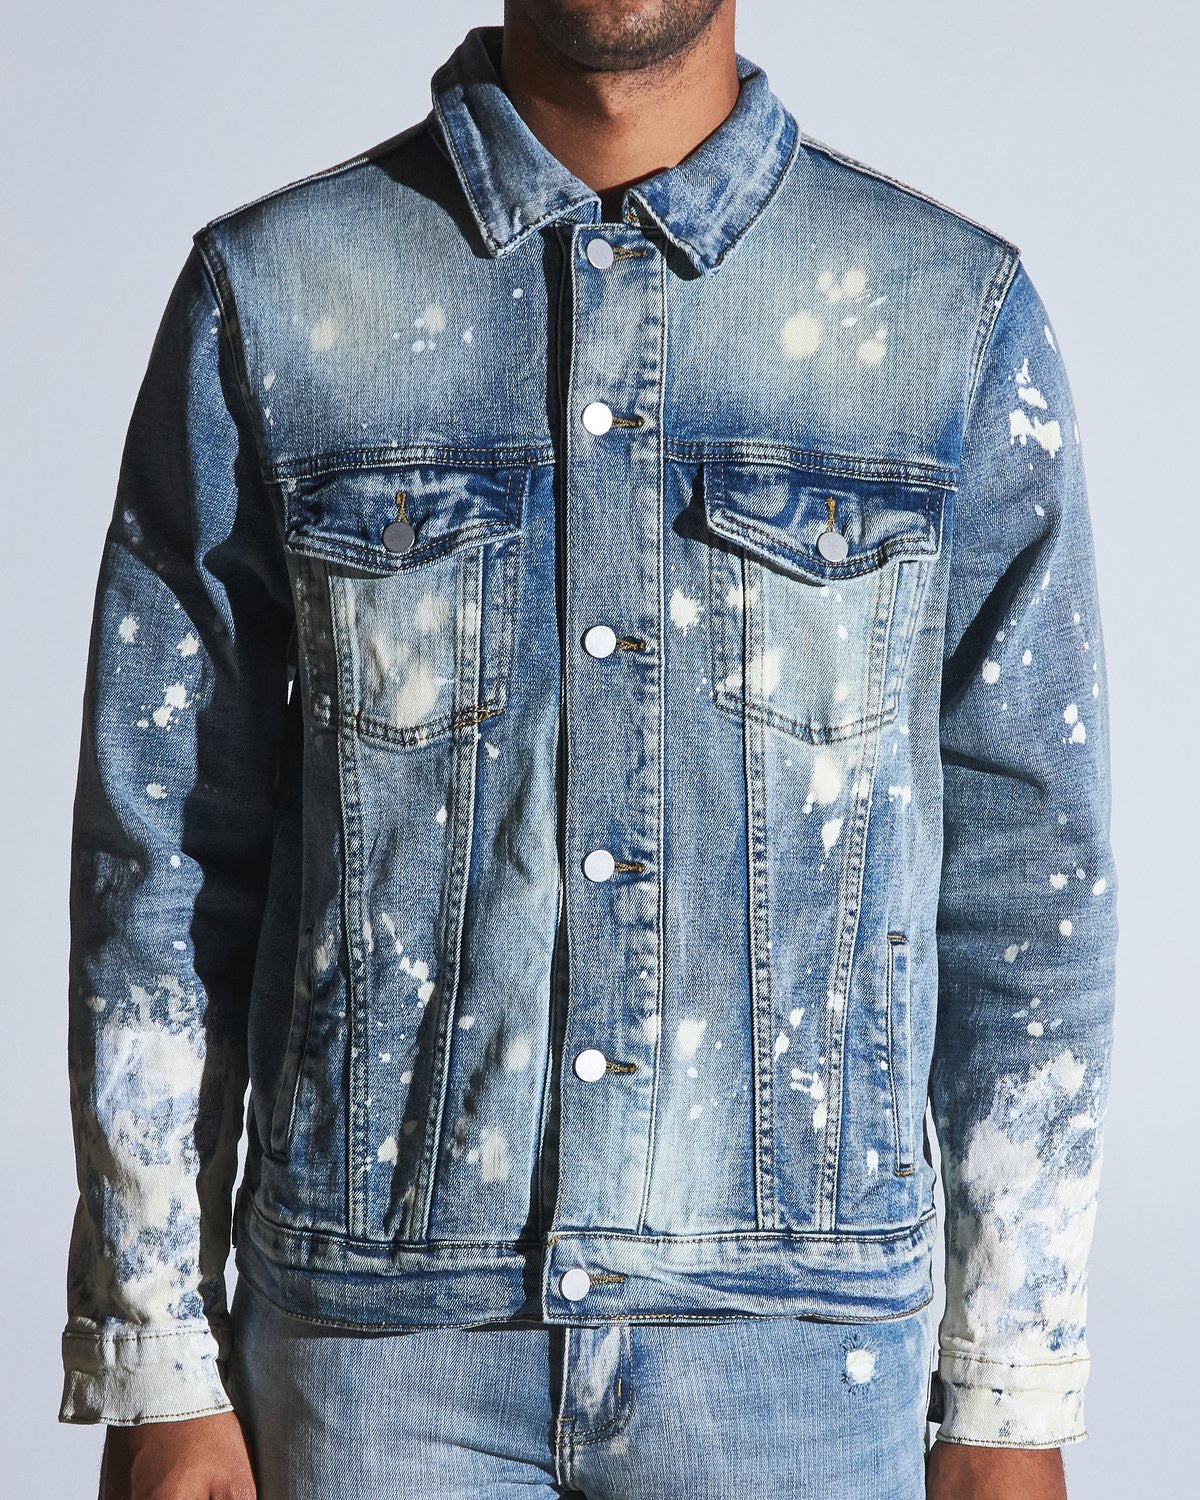 Focus - Spotted Ripped Denim Jacket - White/Blue – Todays Man Store